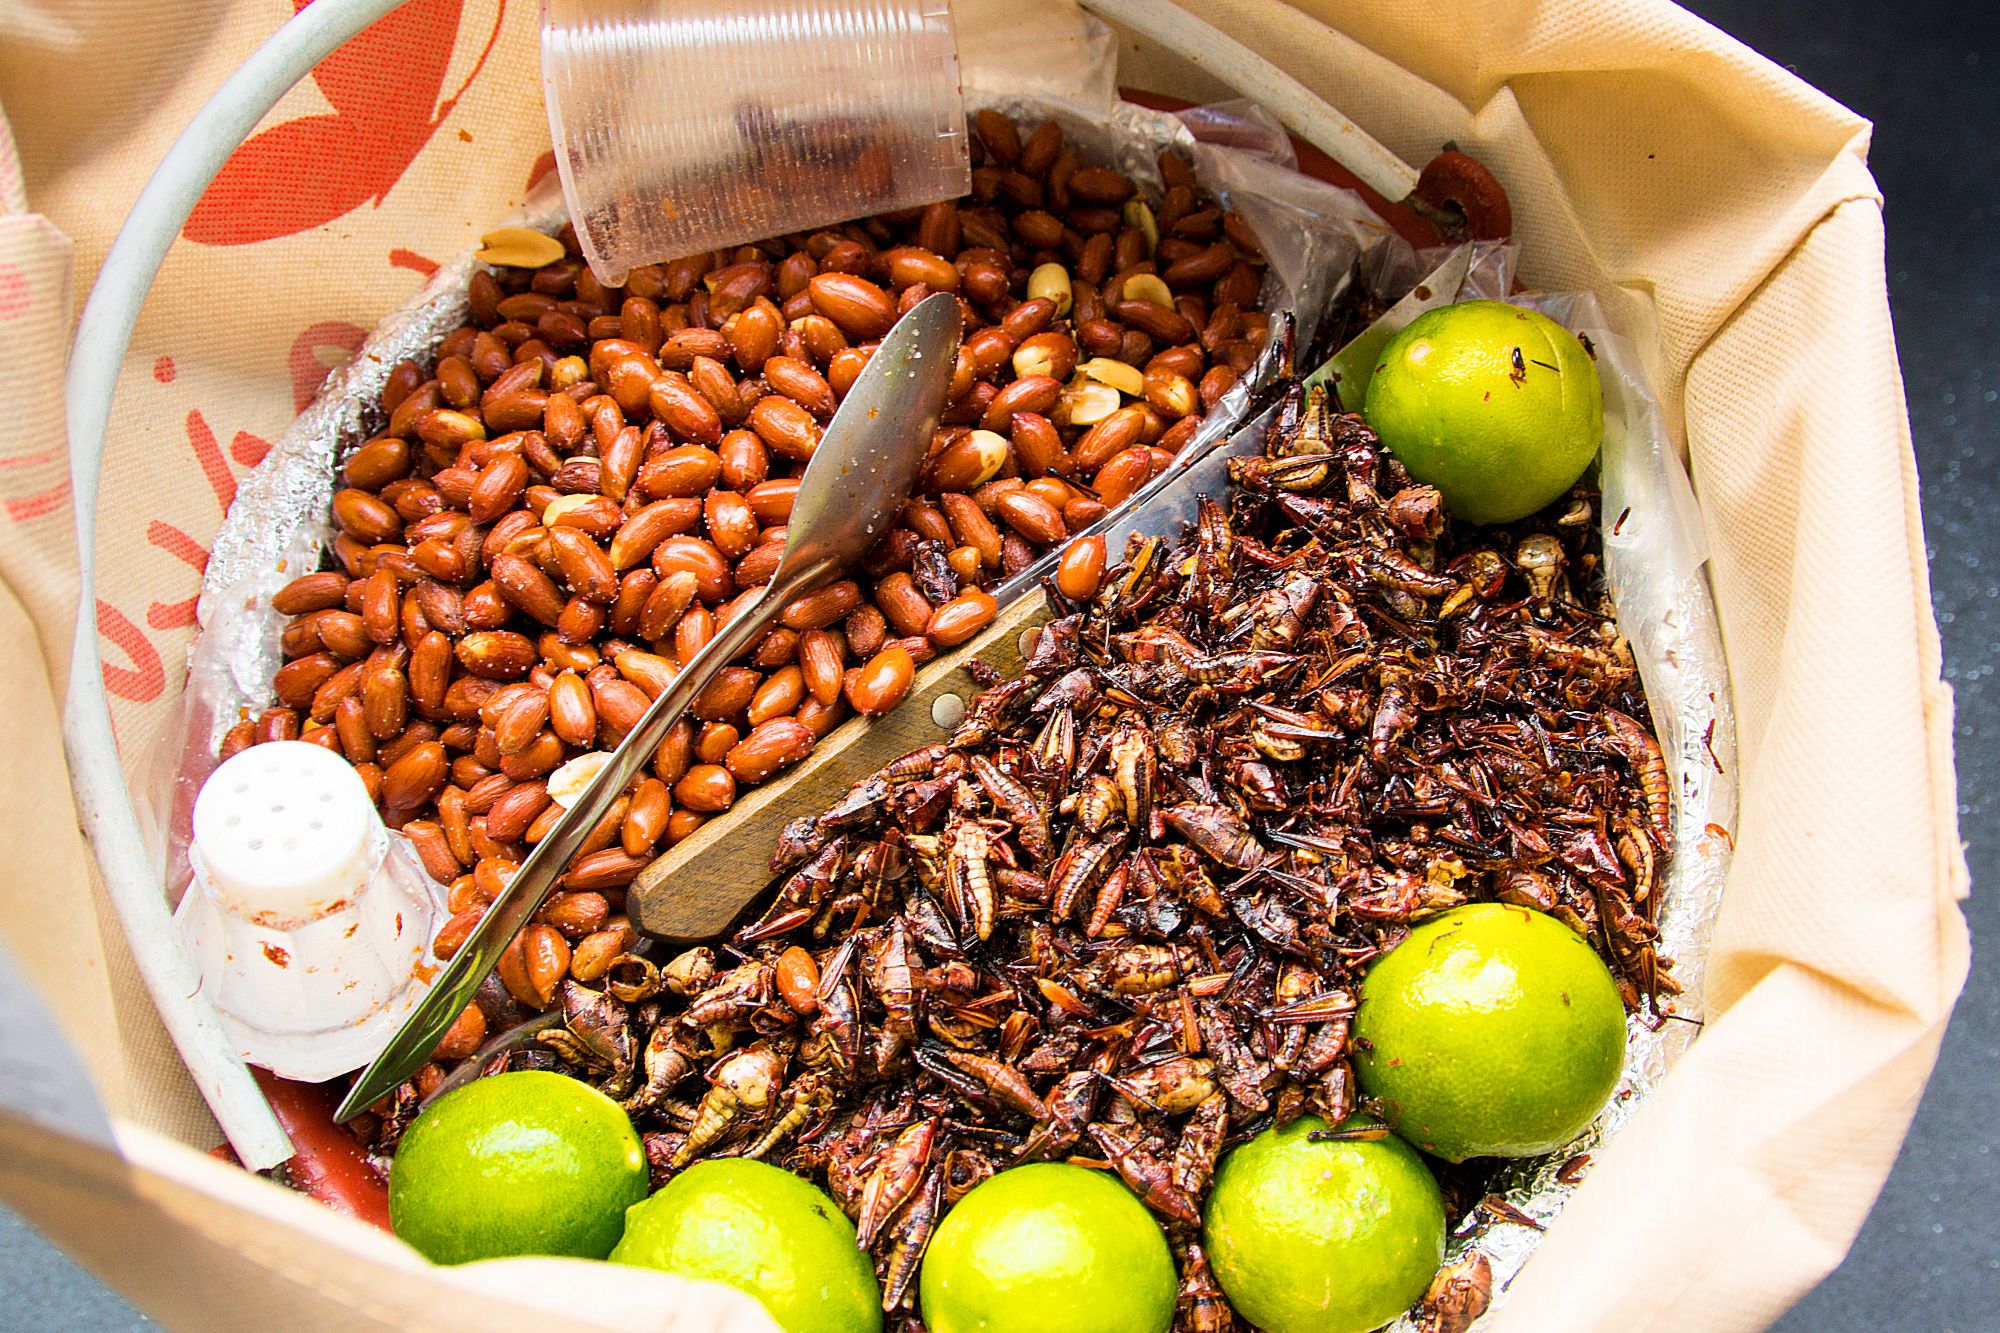 an-introduction-to-some-of-mexico-s-edible-insects